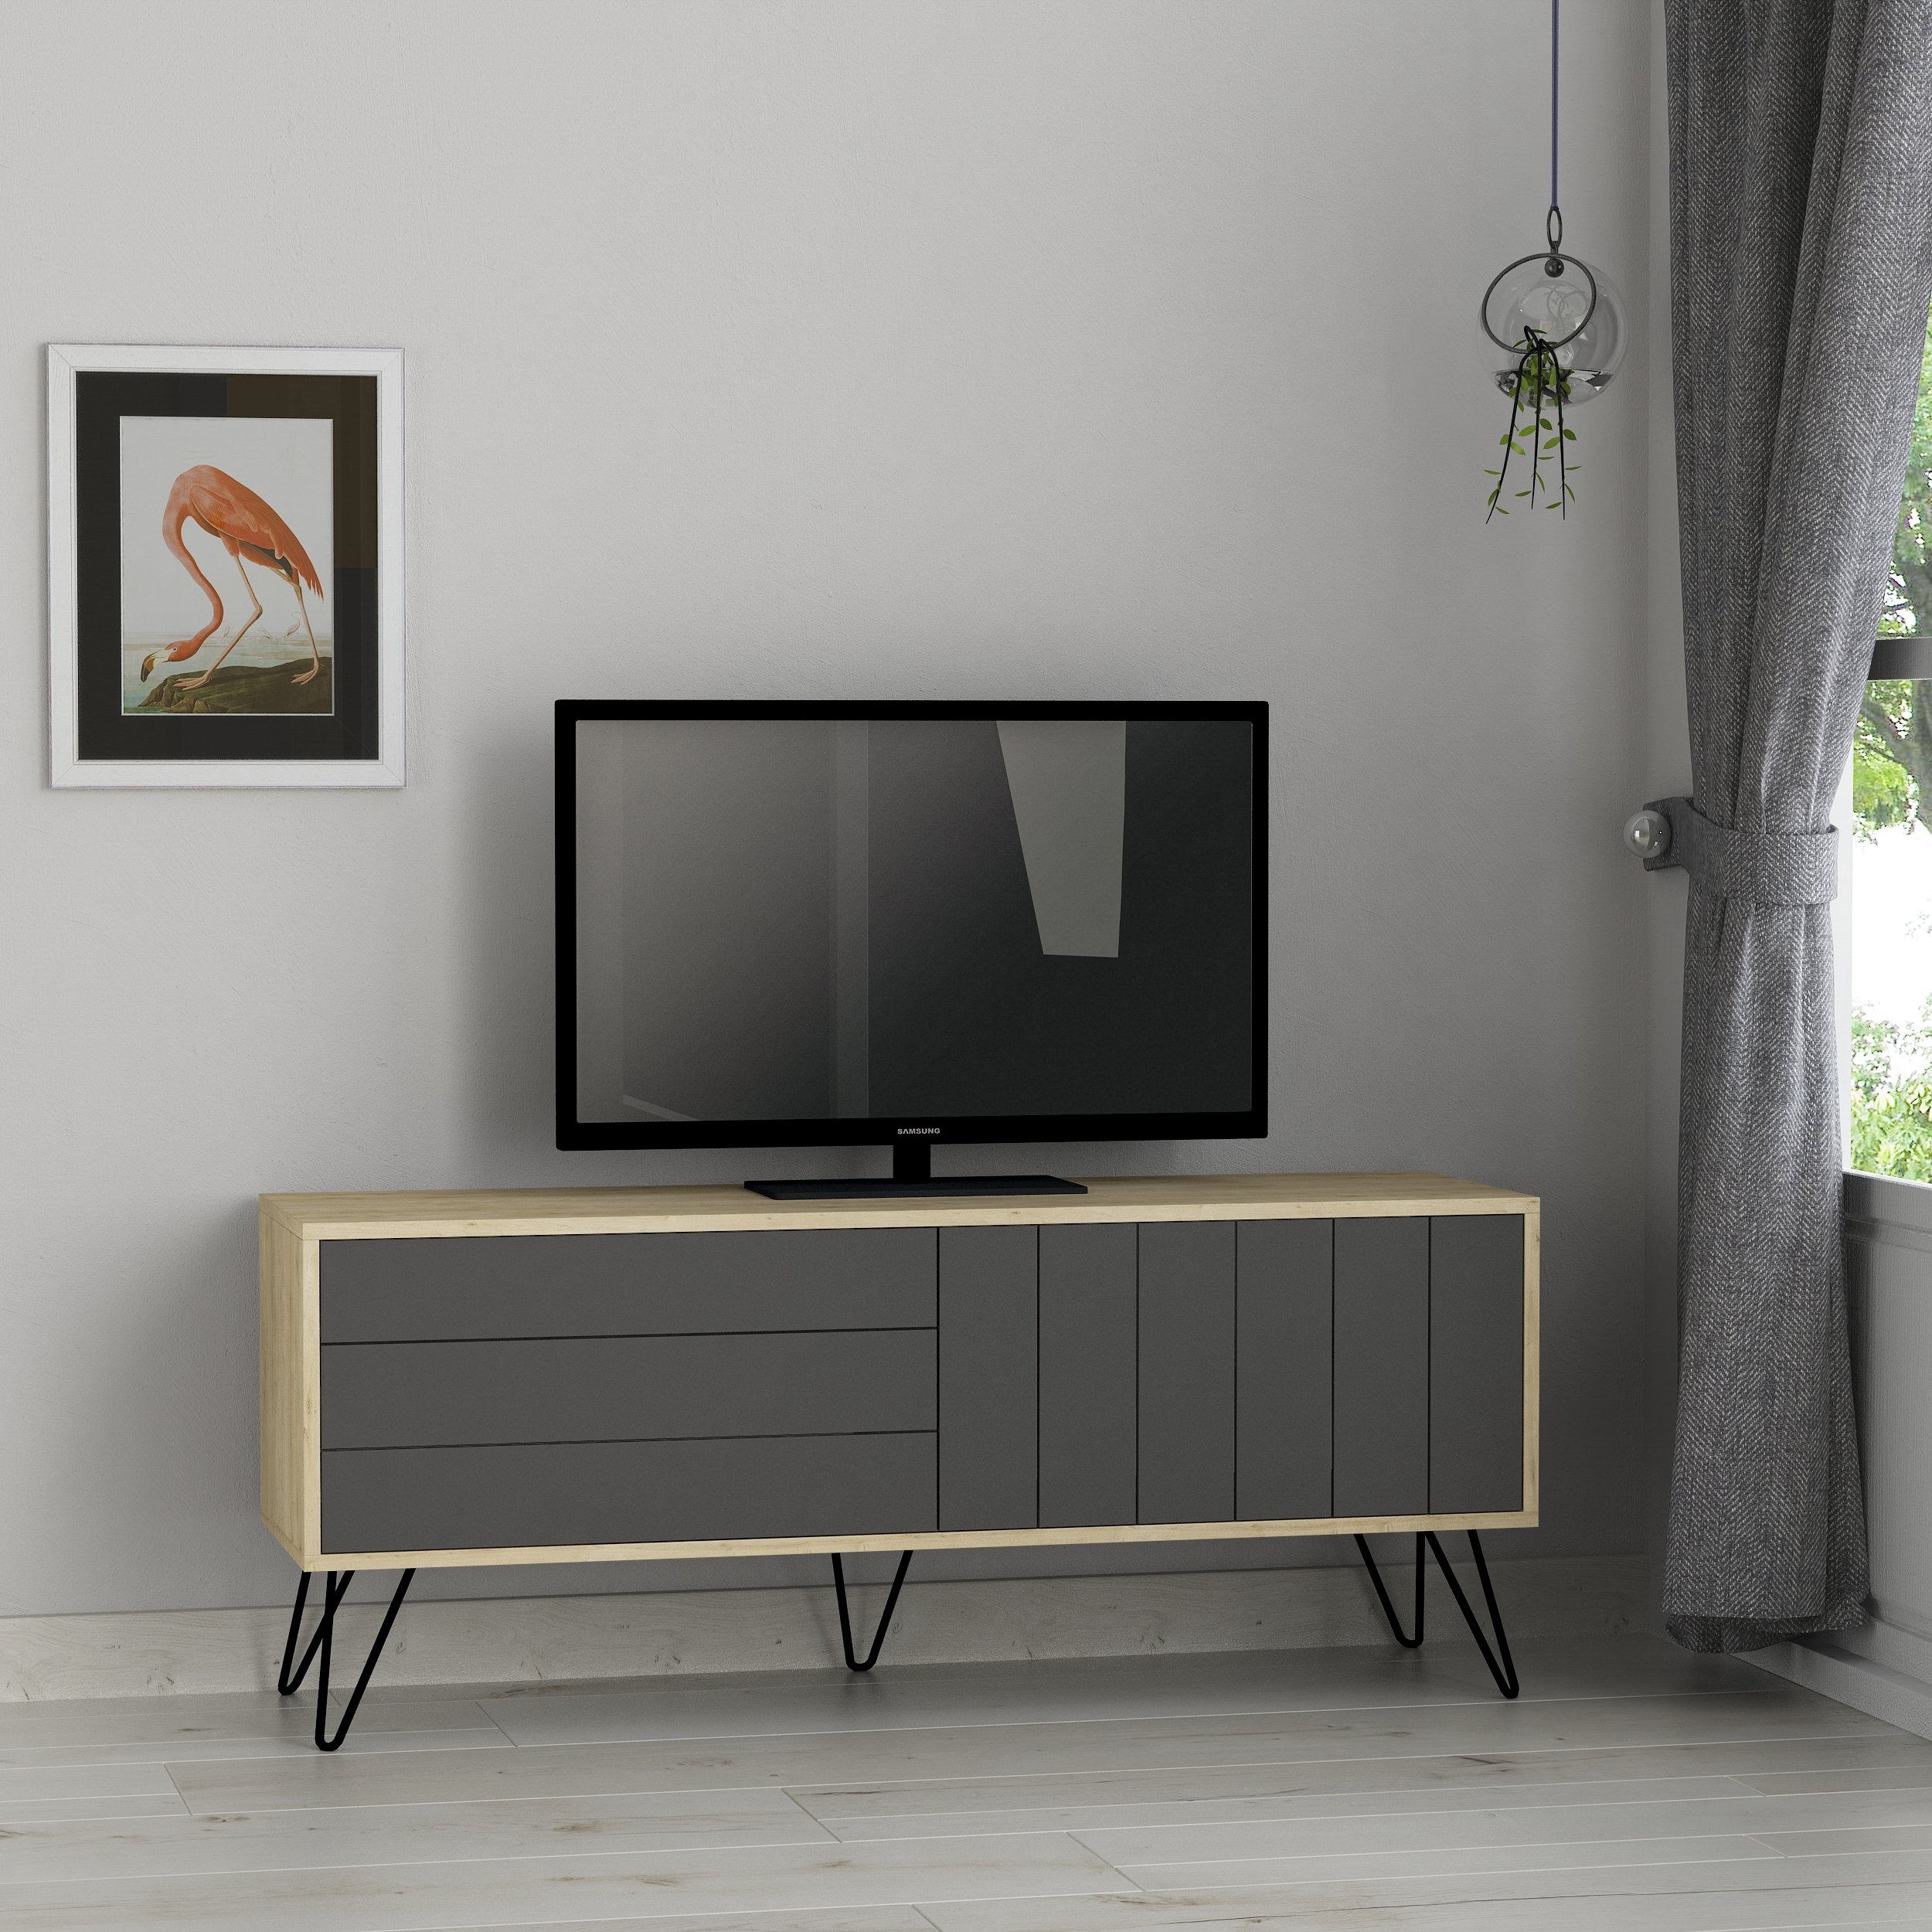 PICADILLY TV STAND - OAK - ANTHRACITE - M.TV.18653.3